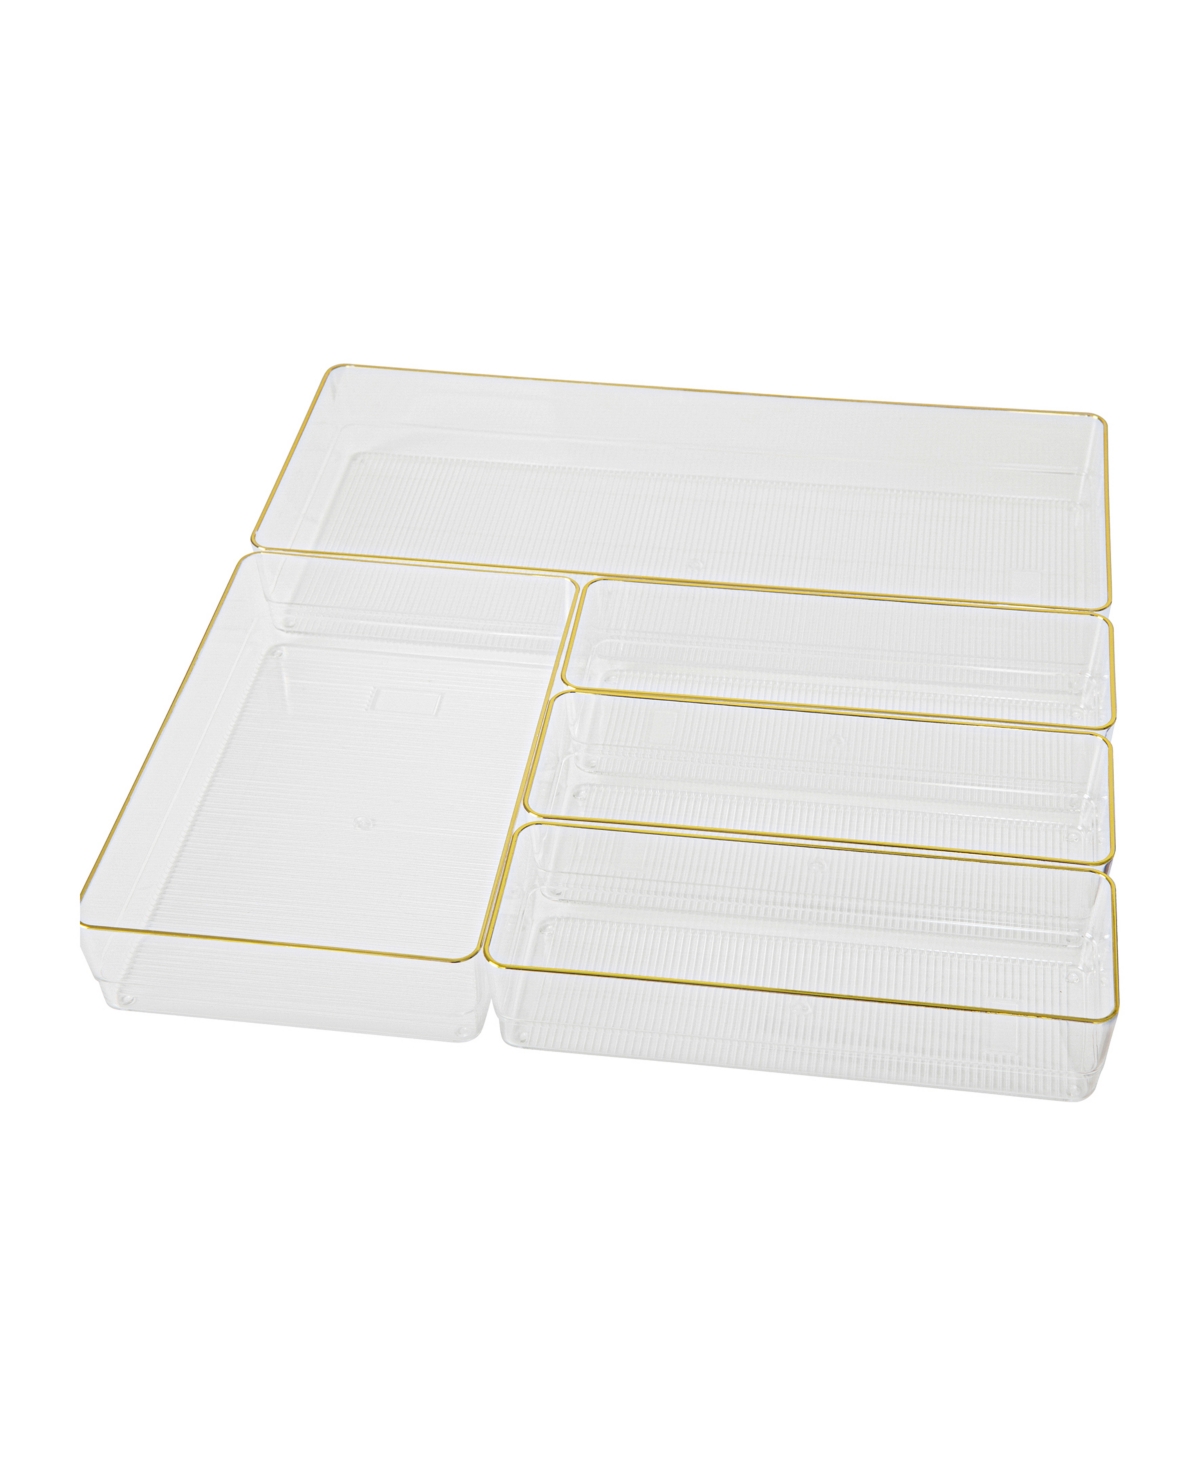 Kerry Plastic Stackable Office Desk Drawer Organizers, Various Sizes, 5 Compartments - Clear, Gold Trim